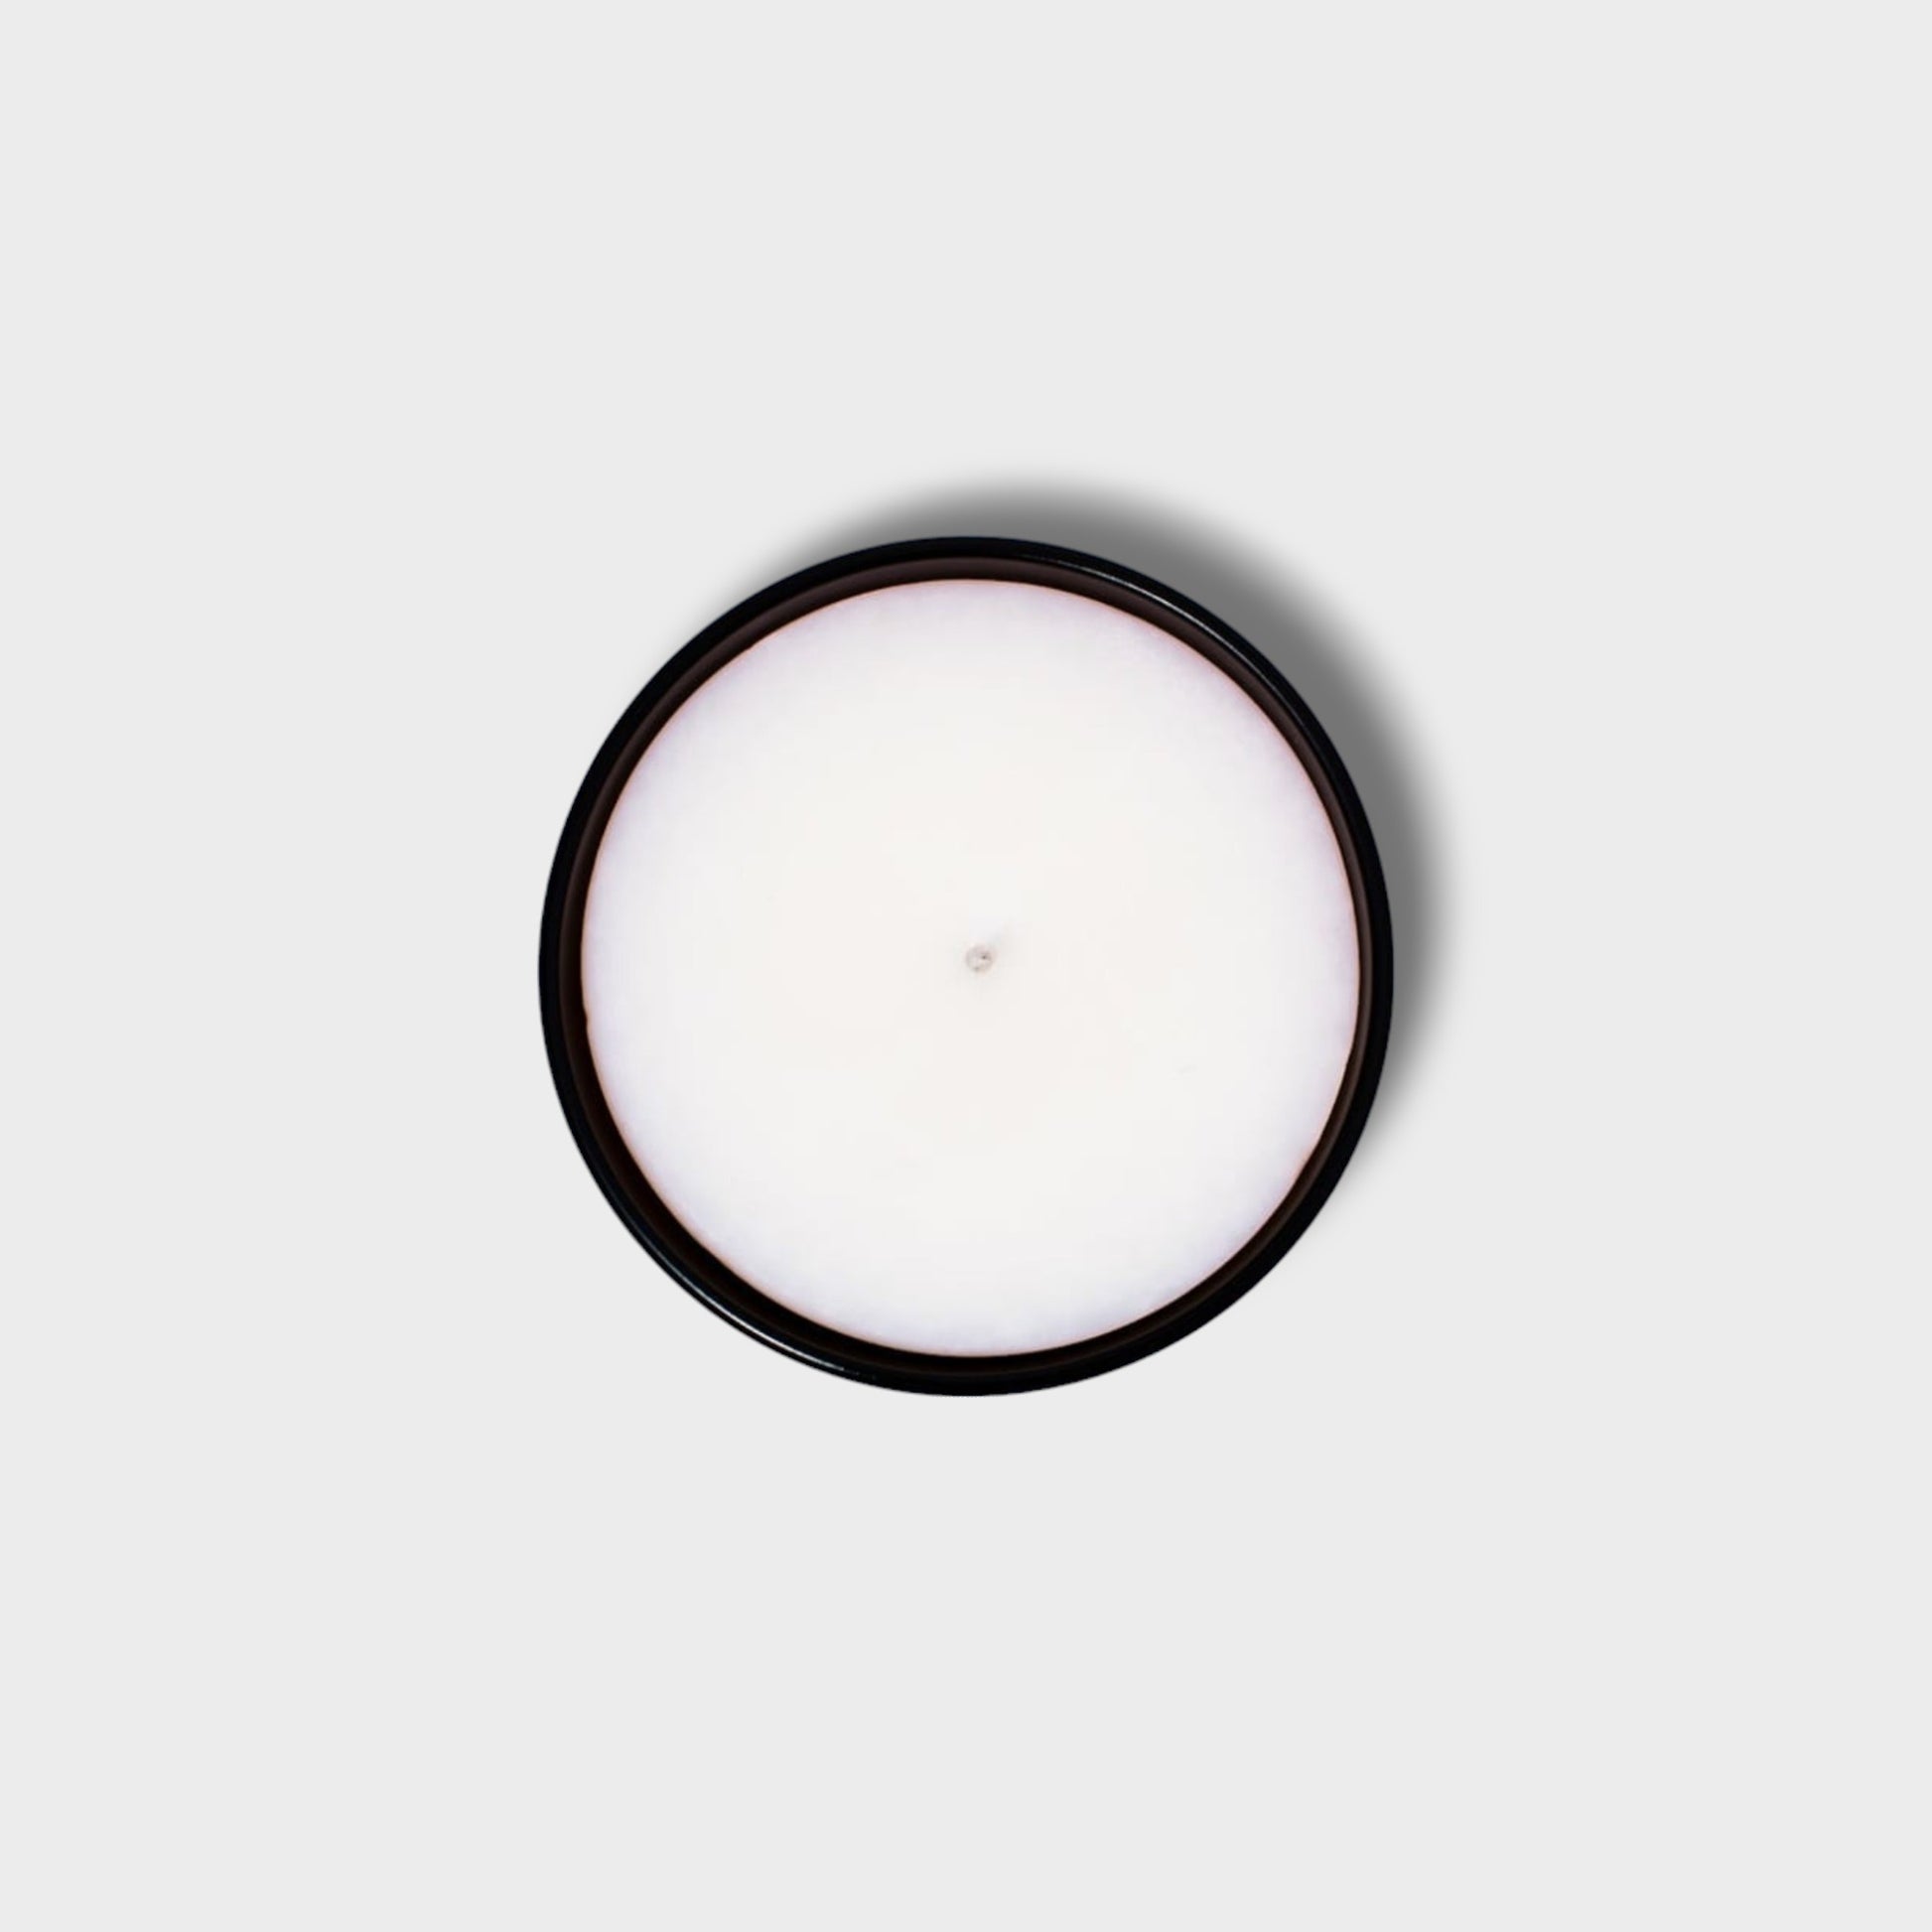 300 G NOAH SCENTED CANDLE